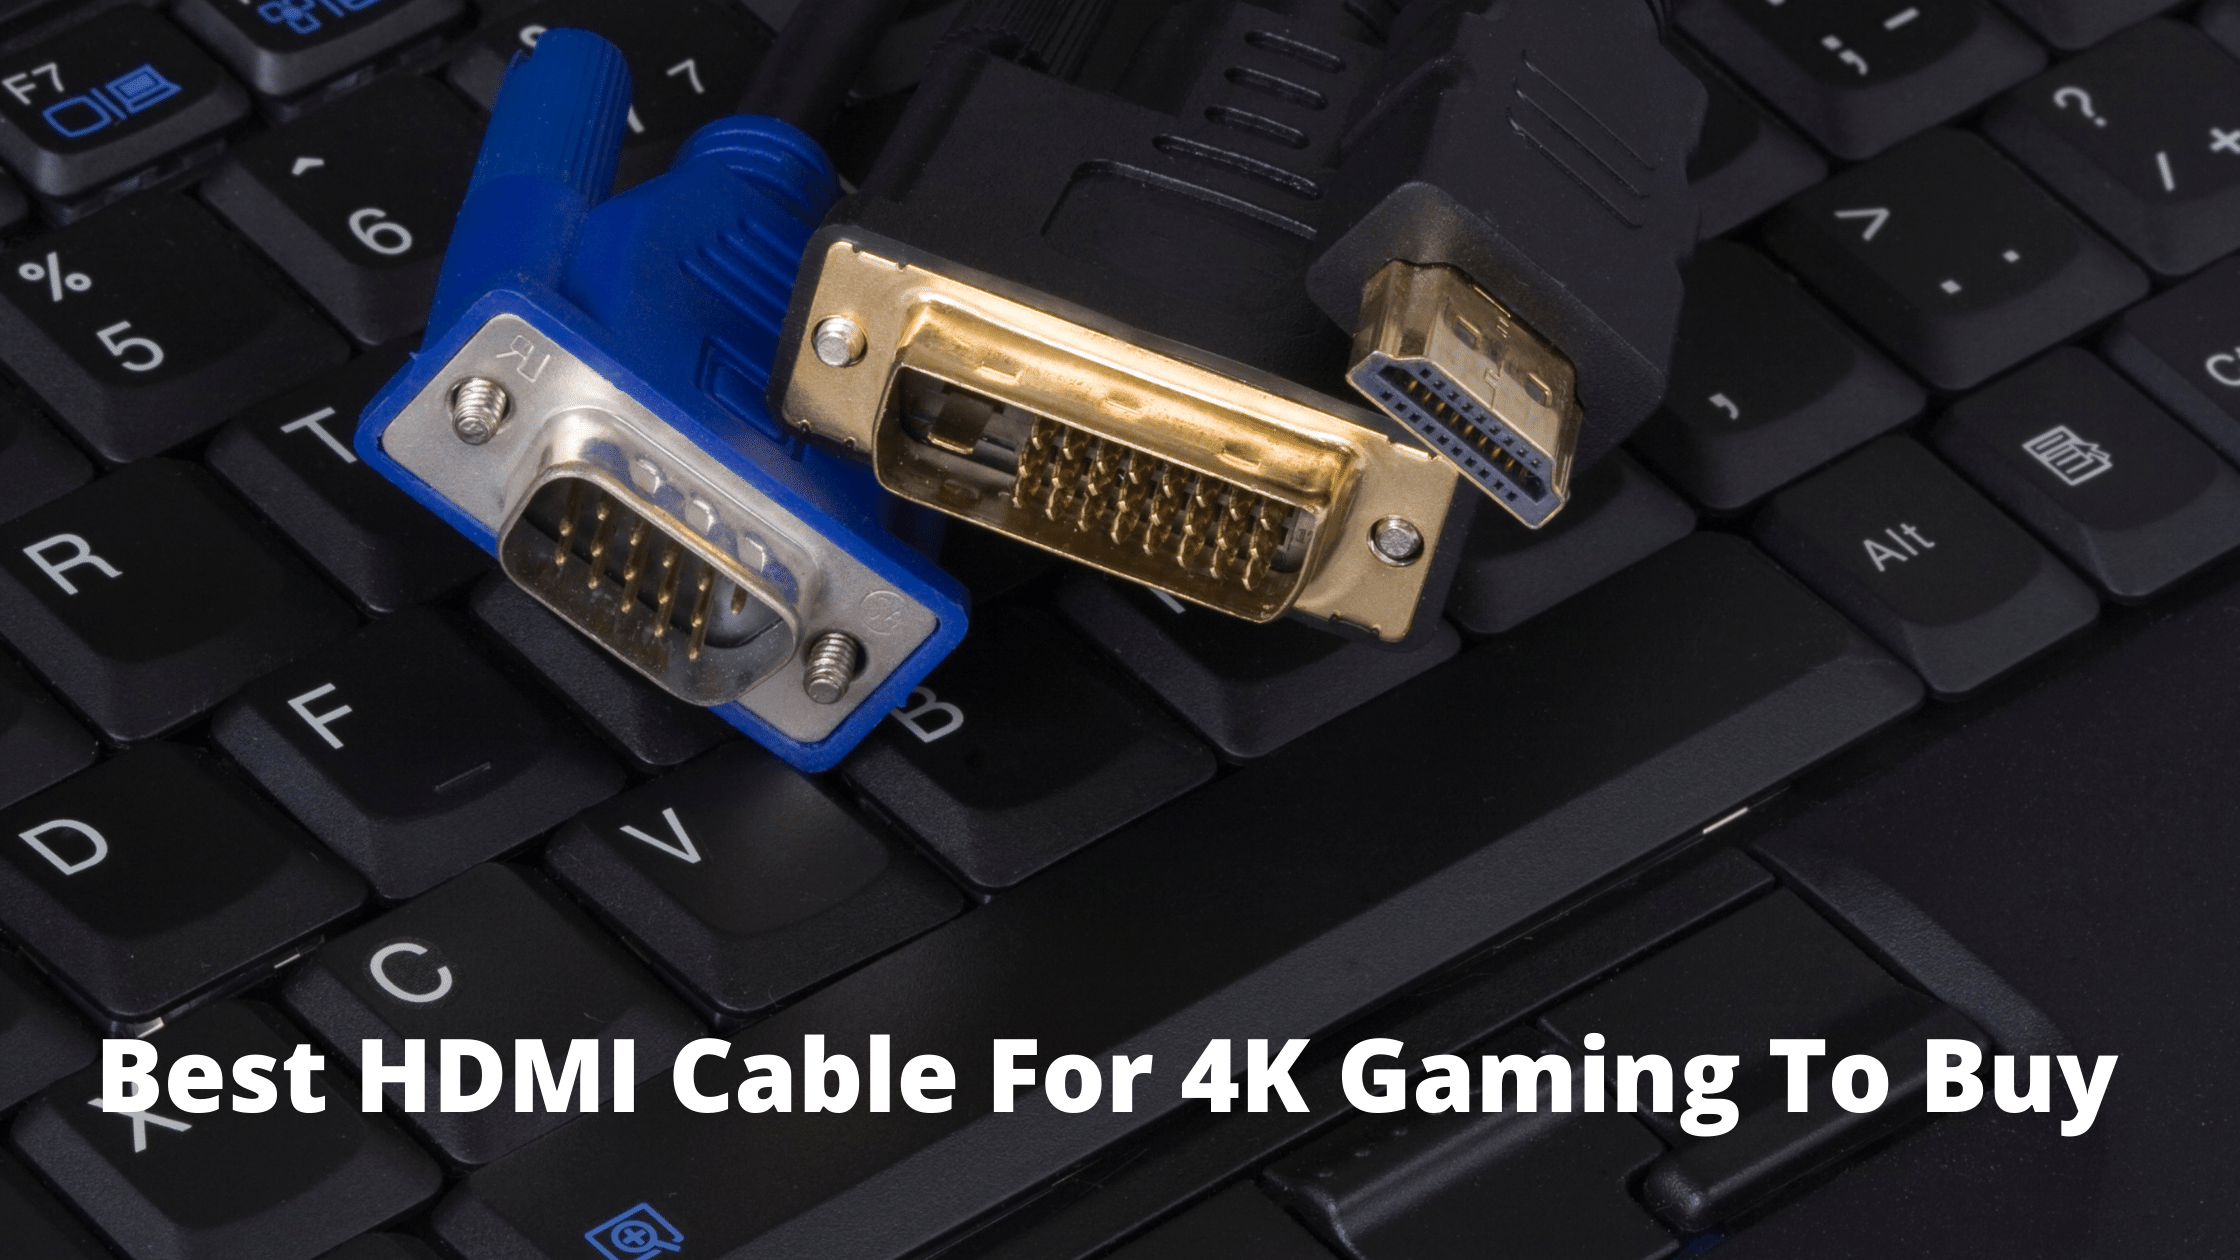 Best HDMI Cable For 4K Gaming To Buy